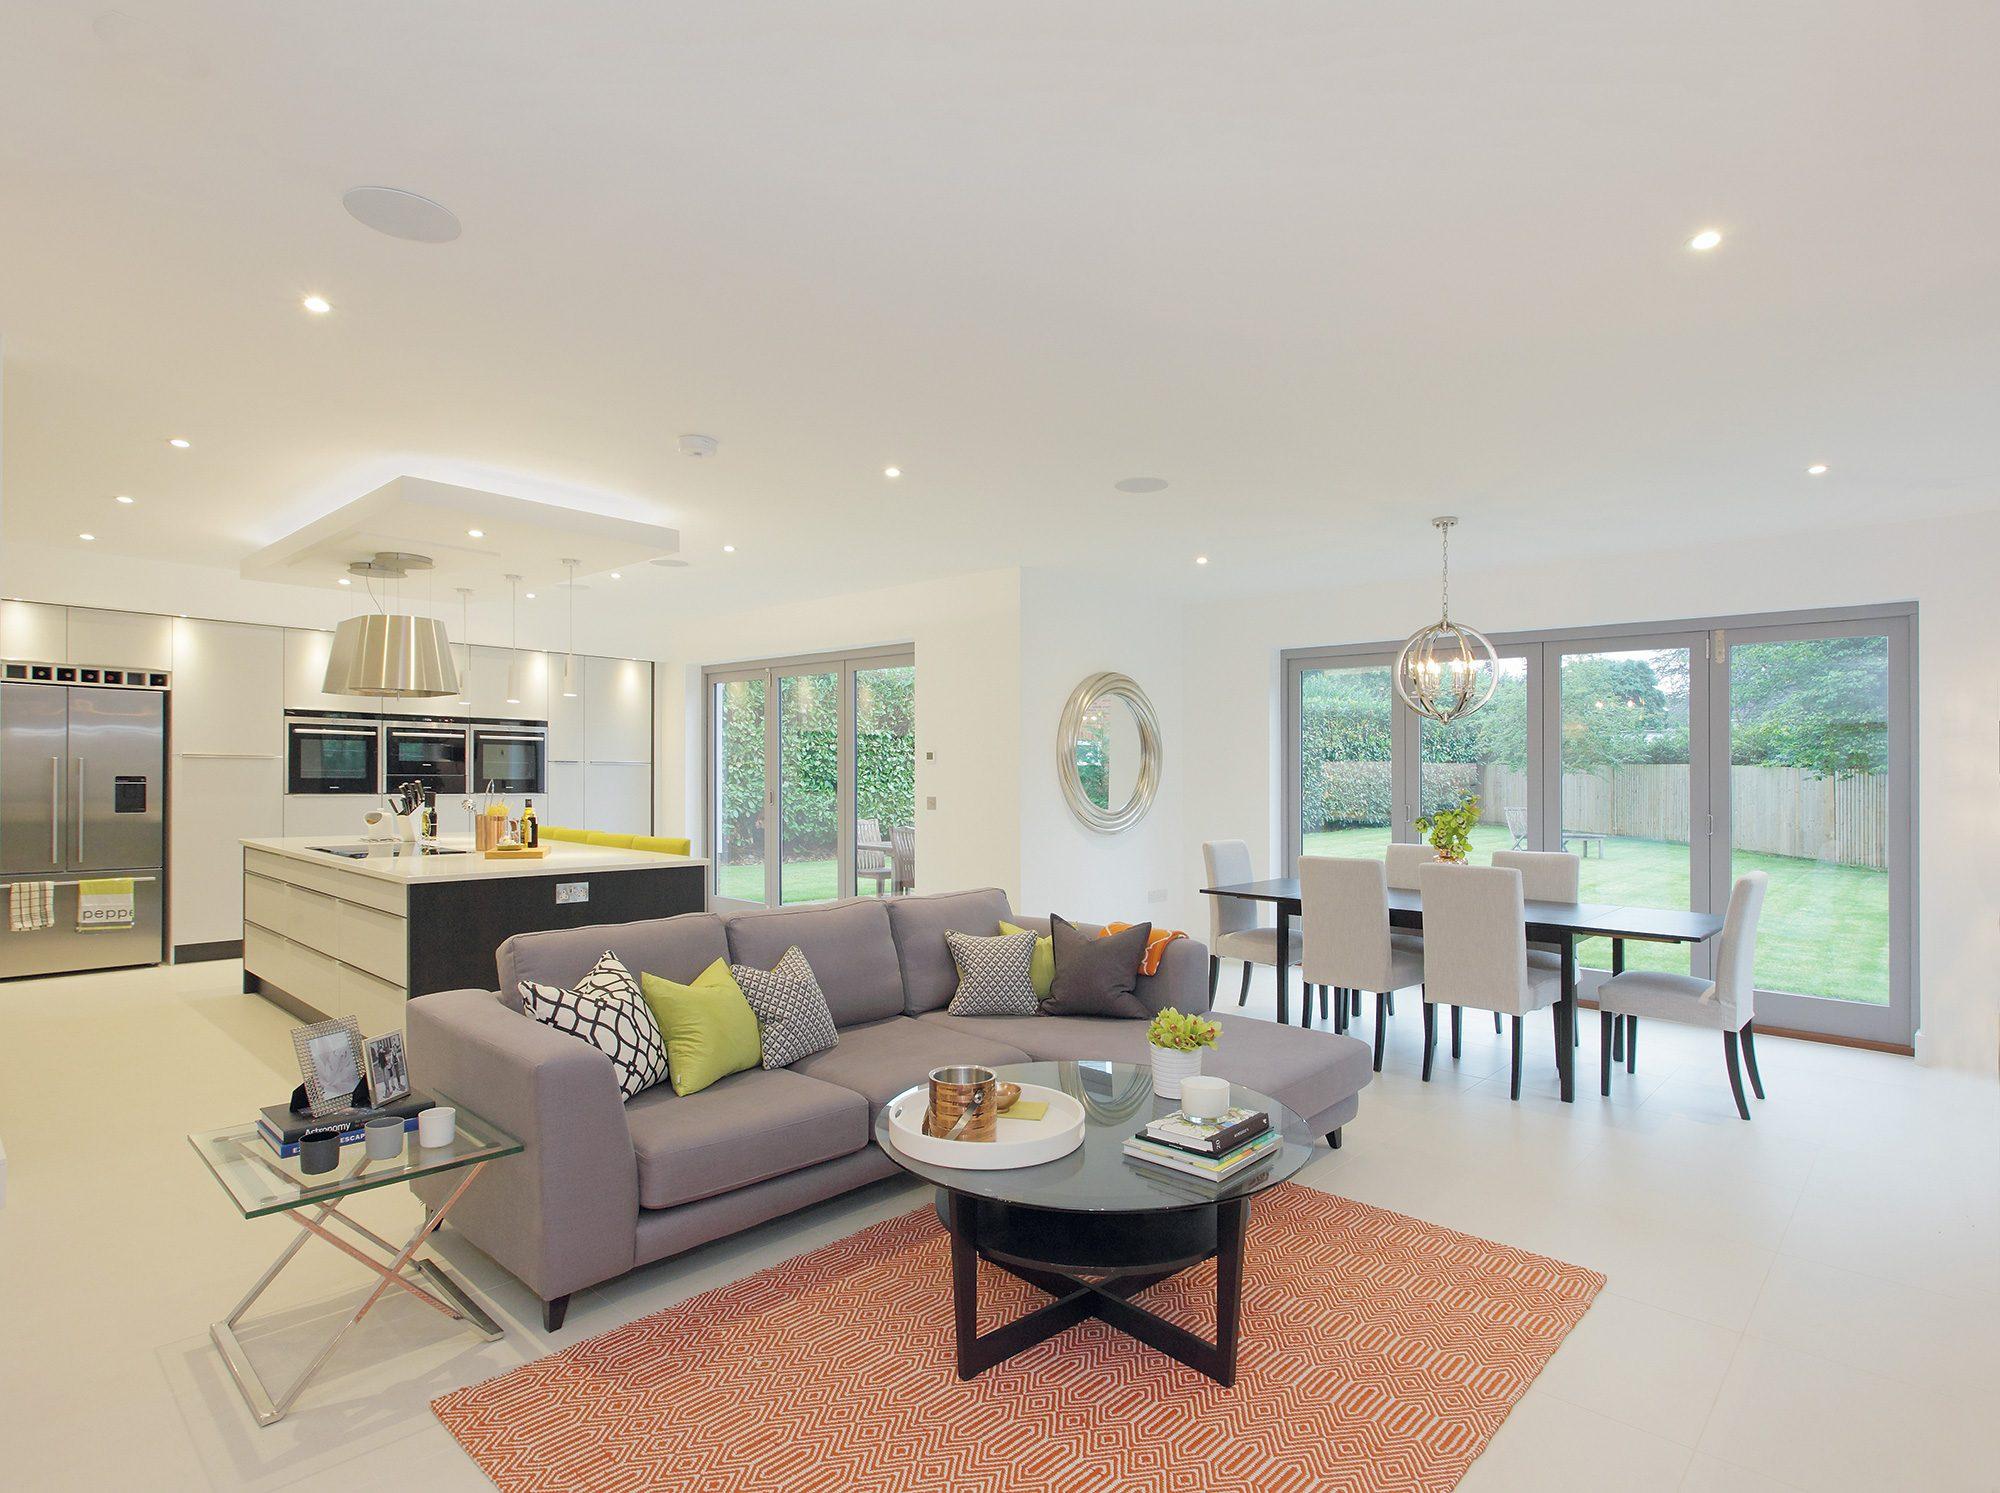 What Is An Open Plan Design?